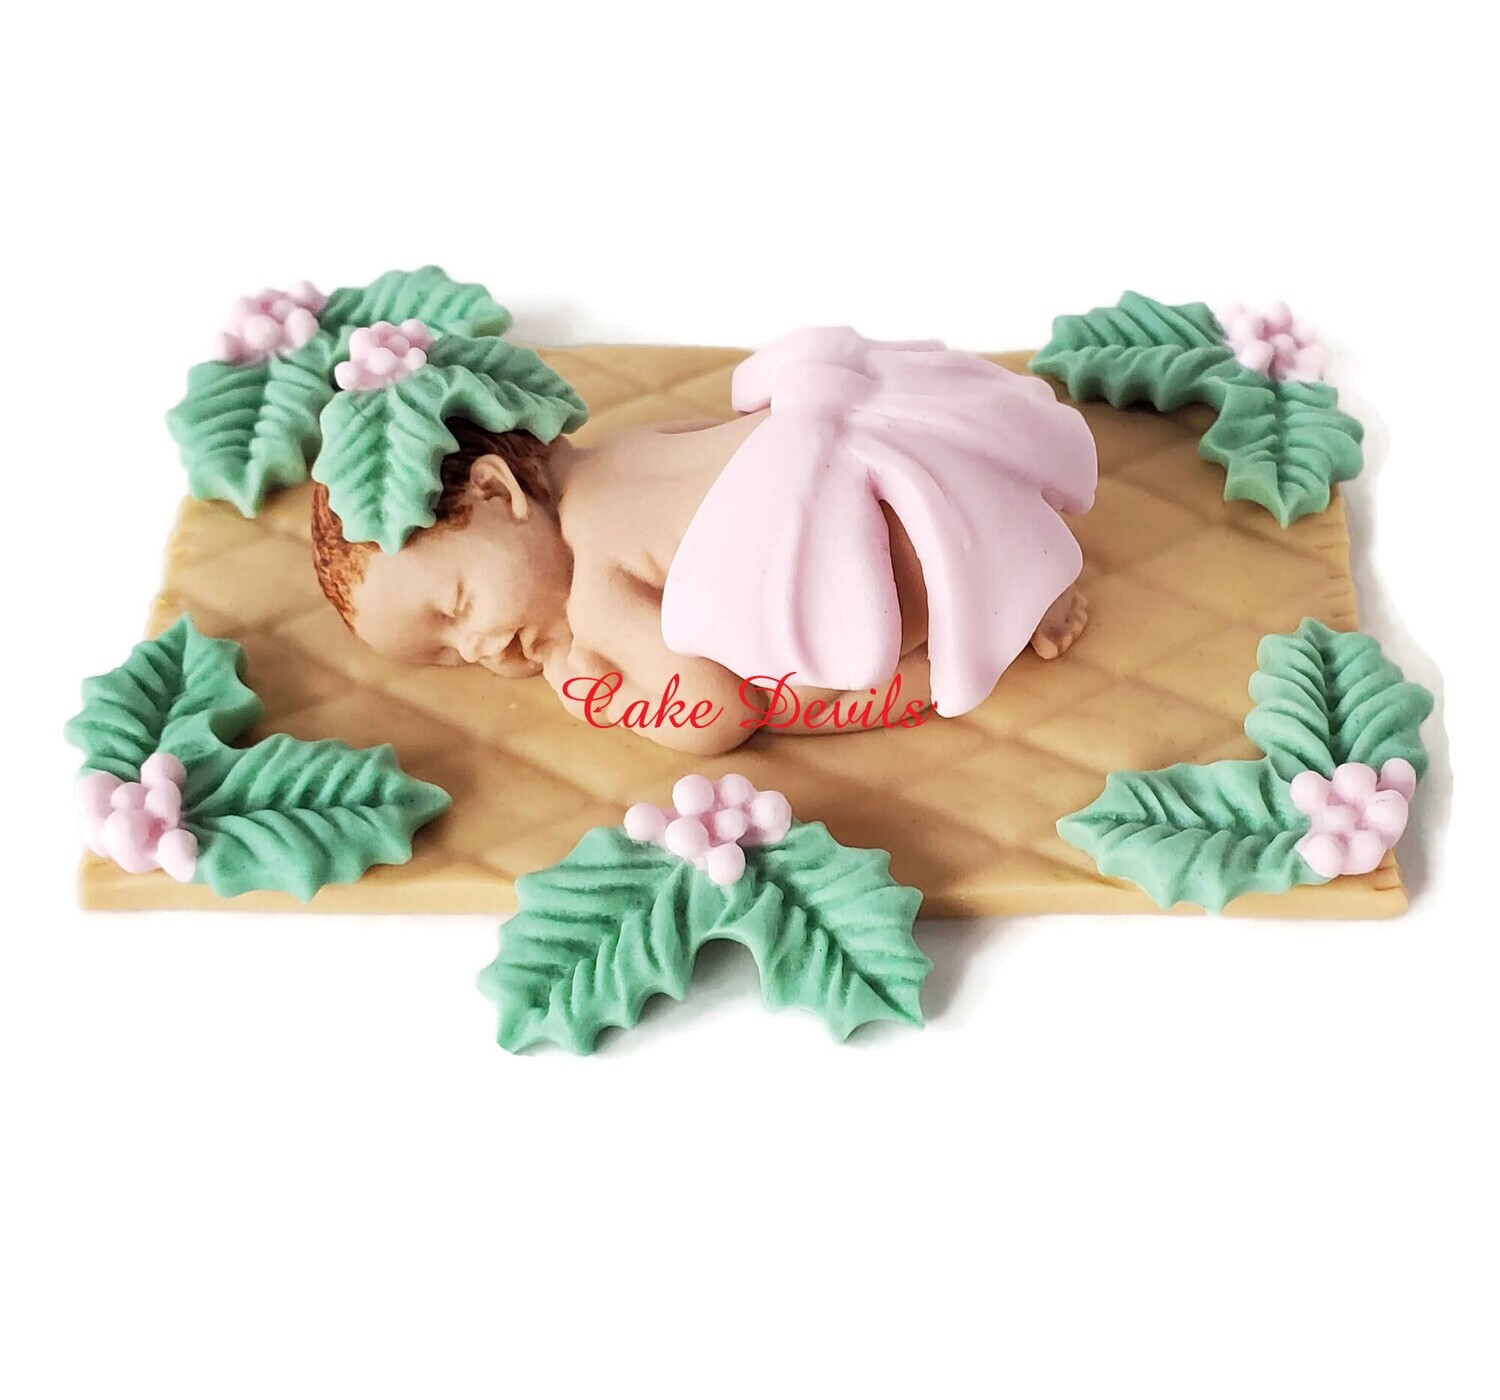 Fondant Baby with Holiday Bow and Holly Berries for a Christmas Baby Shower or Pregnancy Announcement